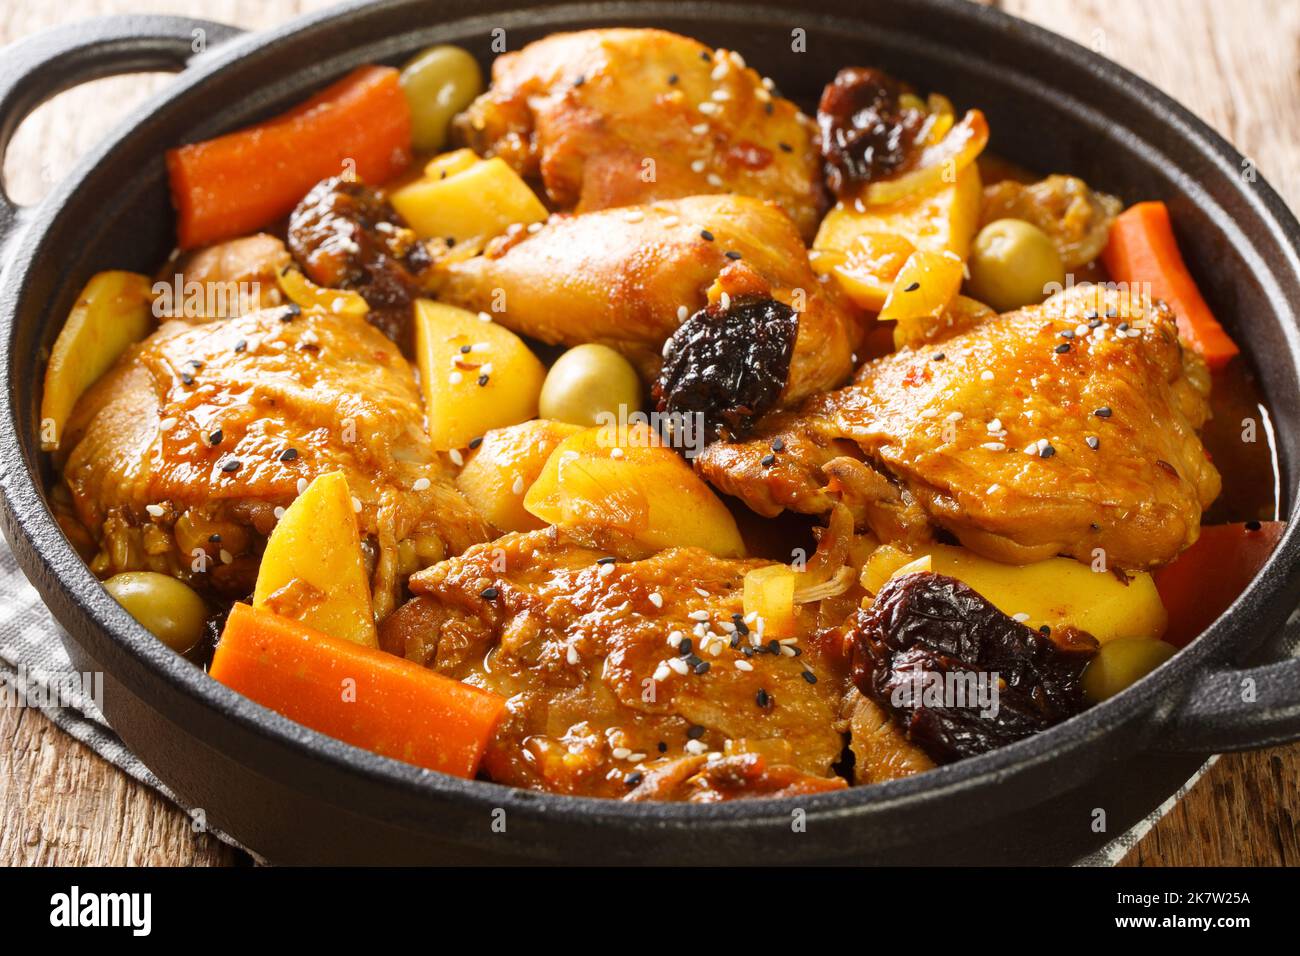 Gallo en chicha is a rooster cooked in a fermented corn drink with vegetable and spices closeup on the pan on the wooden table. Horizontal Stock Photo